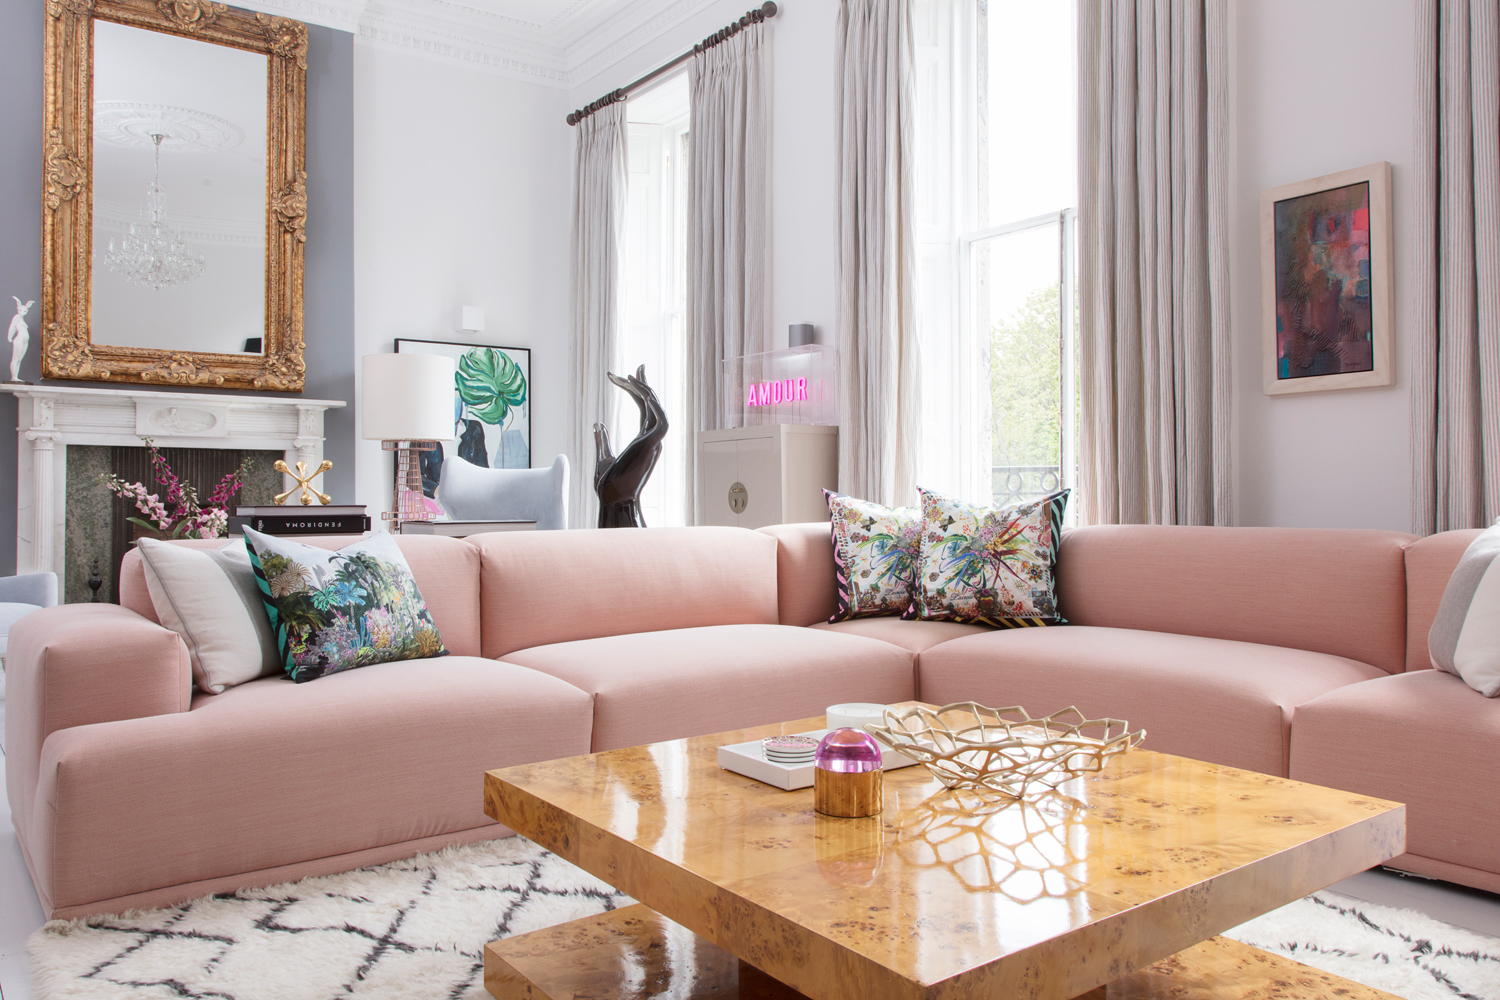 Sofa by Muuto; cushions by Christian Lacroix; coffee table by Jonathan Adler/Photo: Susie Lowe